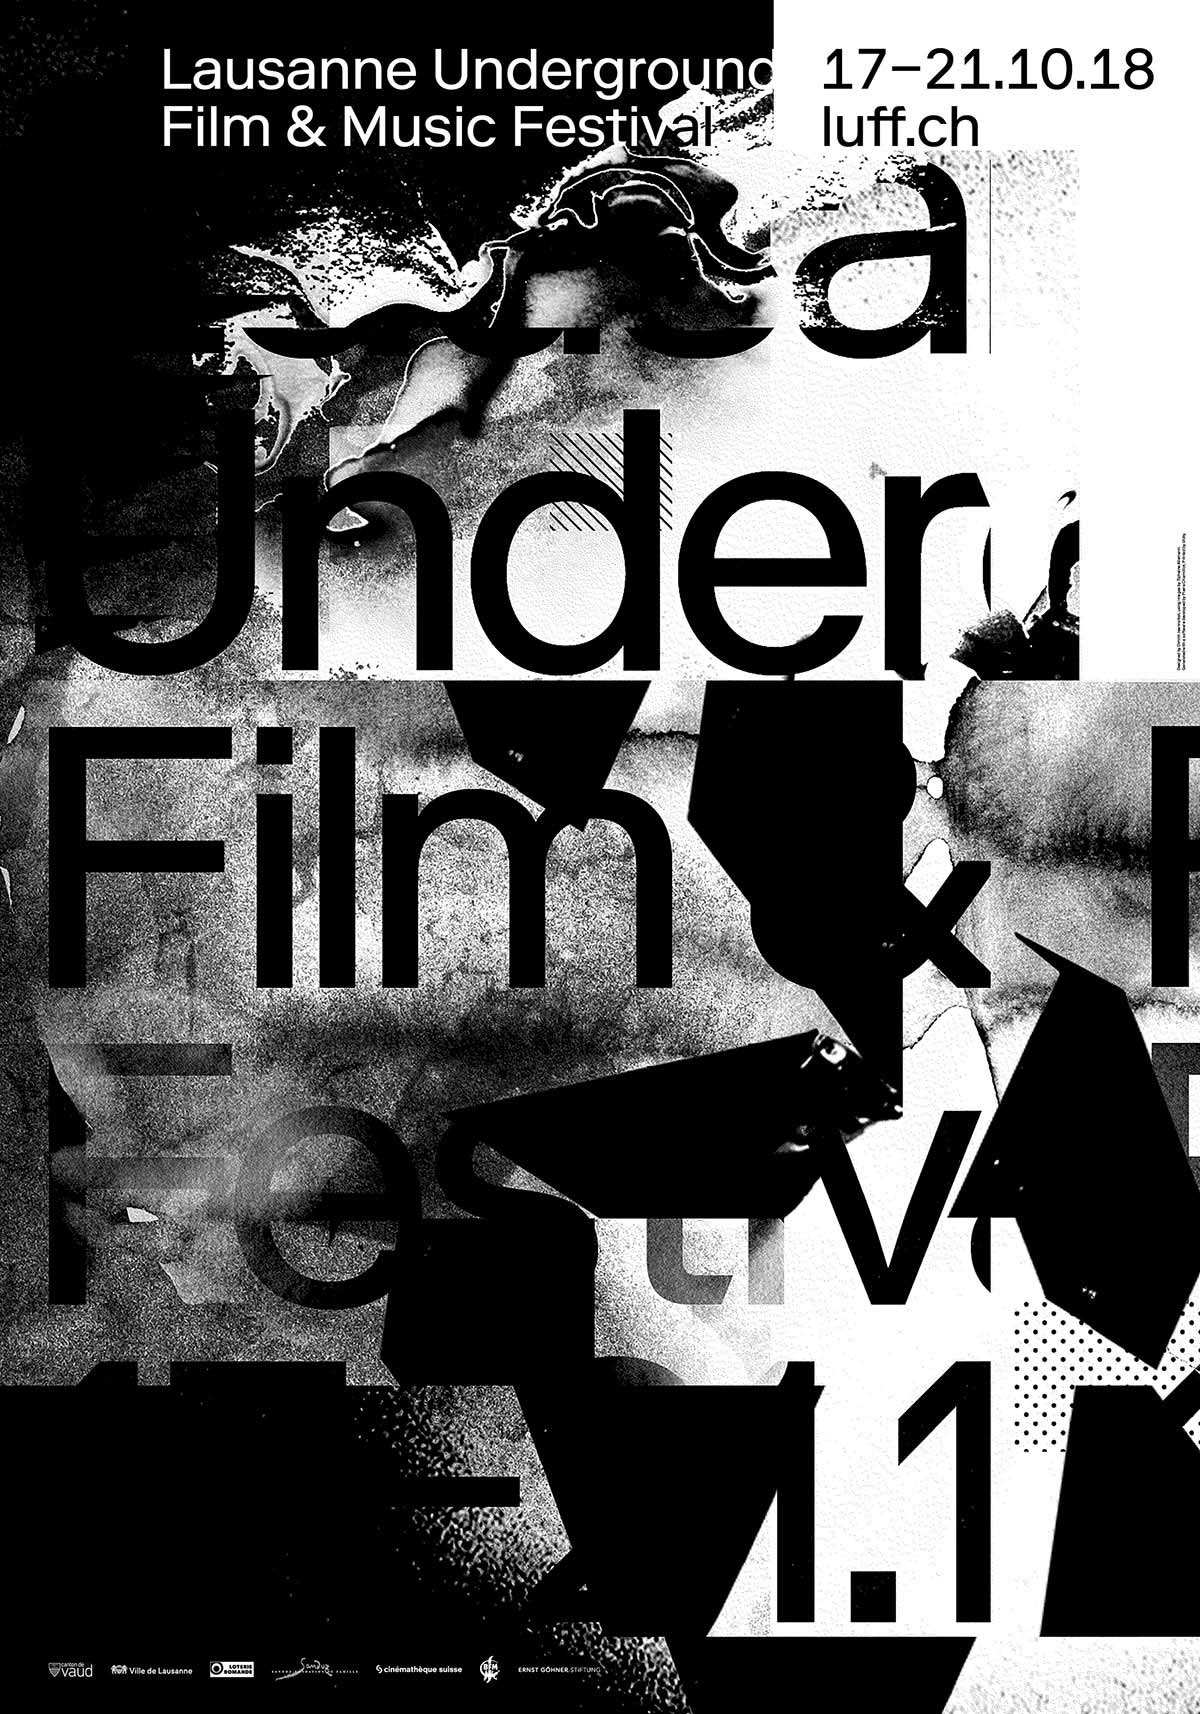 Lausanne Underground Film Festival 2018 - Fonts In Use